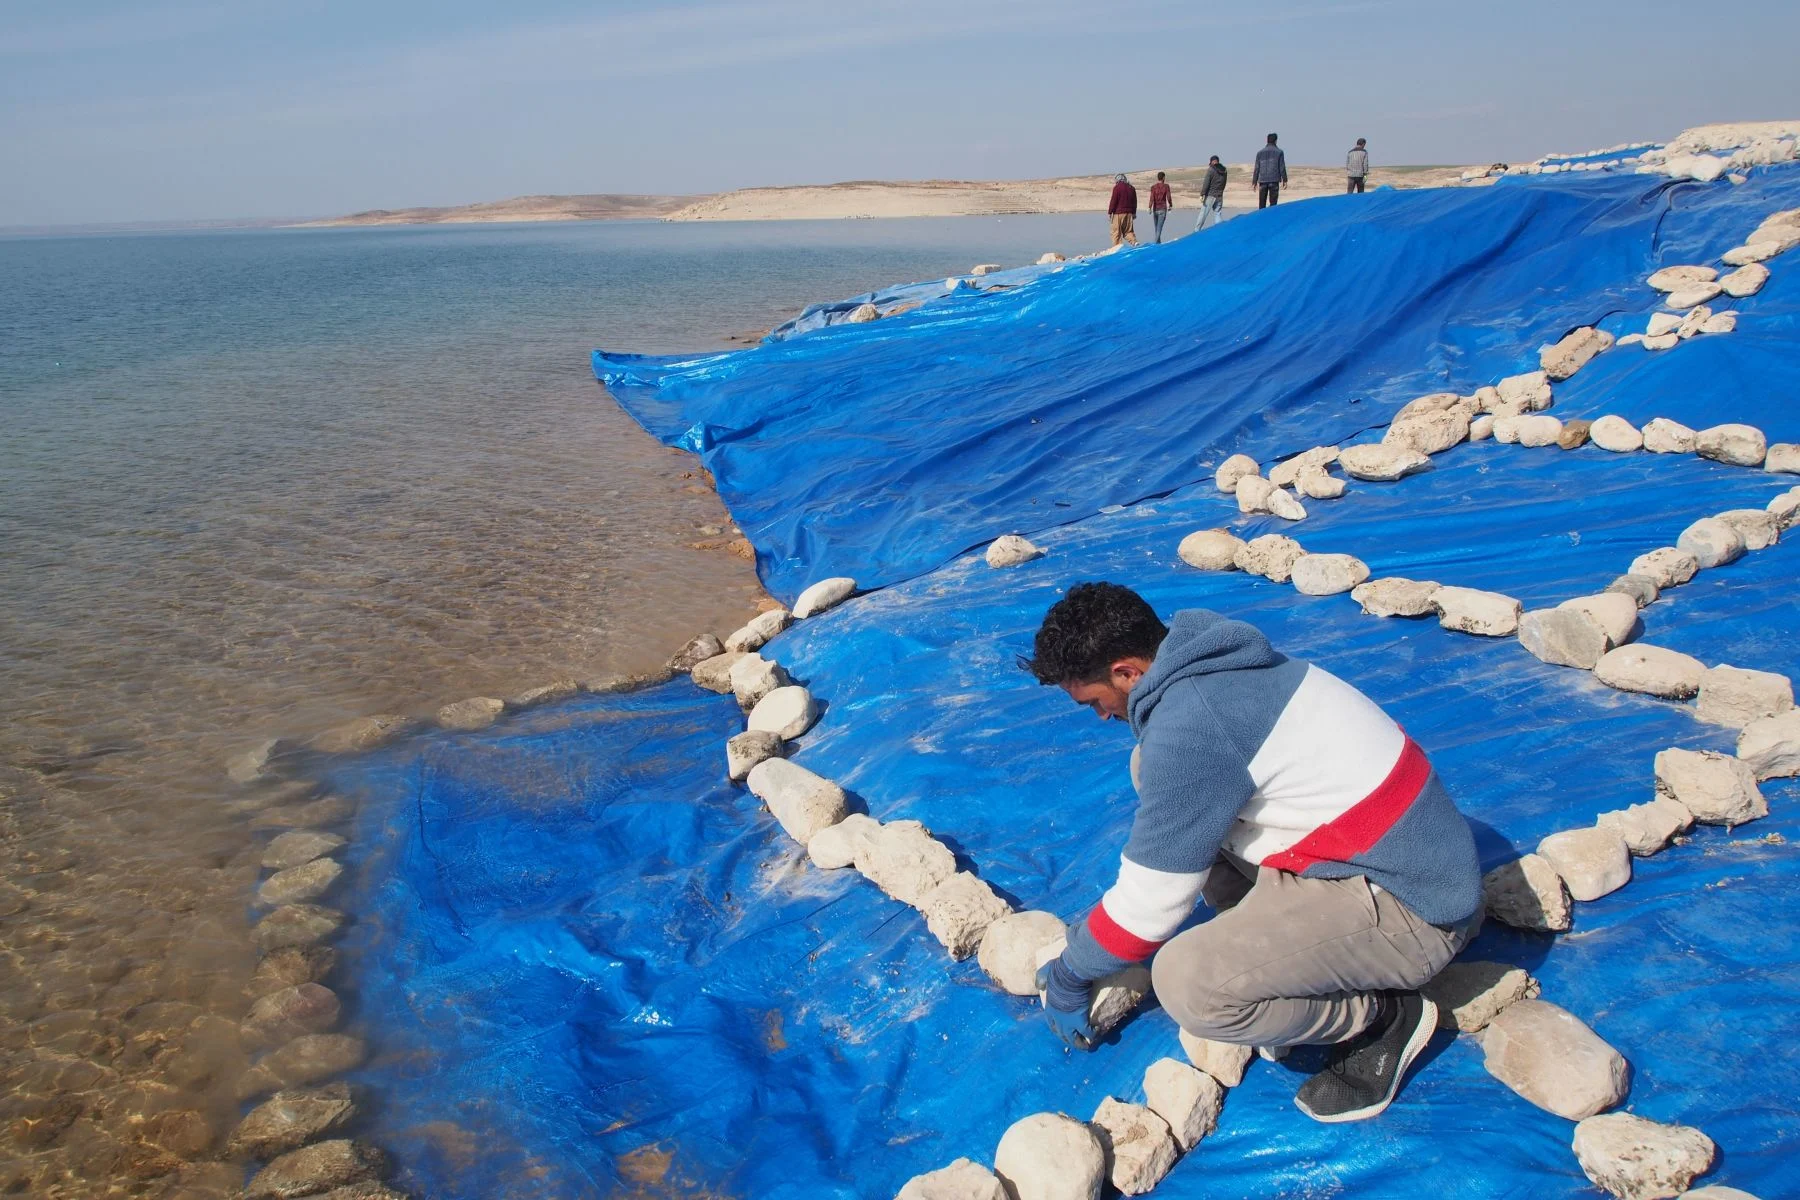 After the research team has completed their work, the excavation is covered extensively with plastic foil to protect it from the rising waters of the Mosul reservoir. (Universities of Freiburg and Tübingen, KAO)